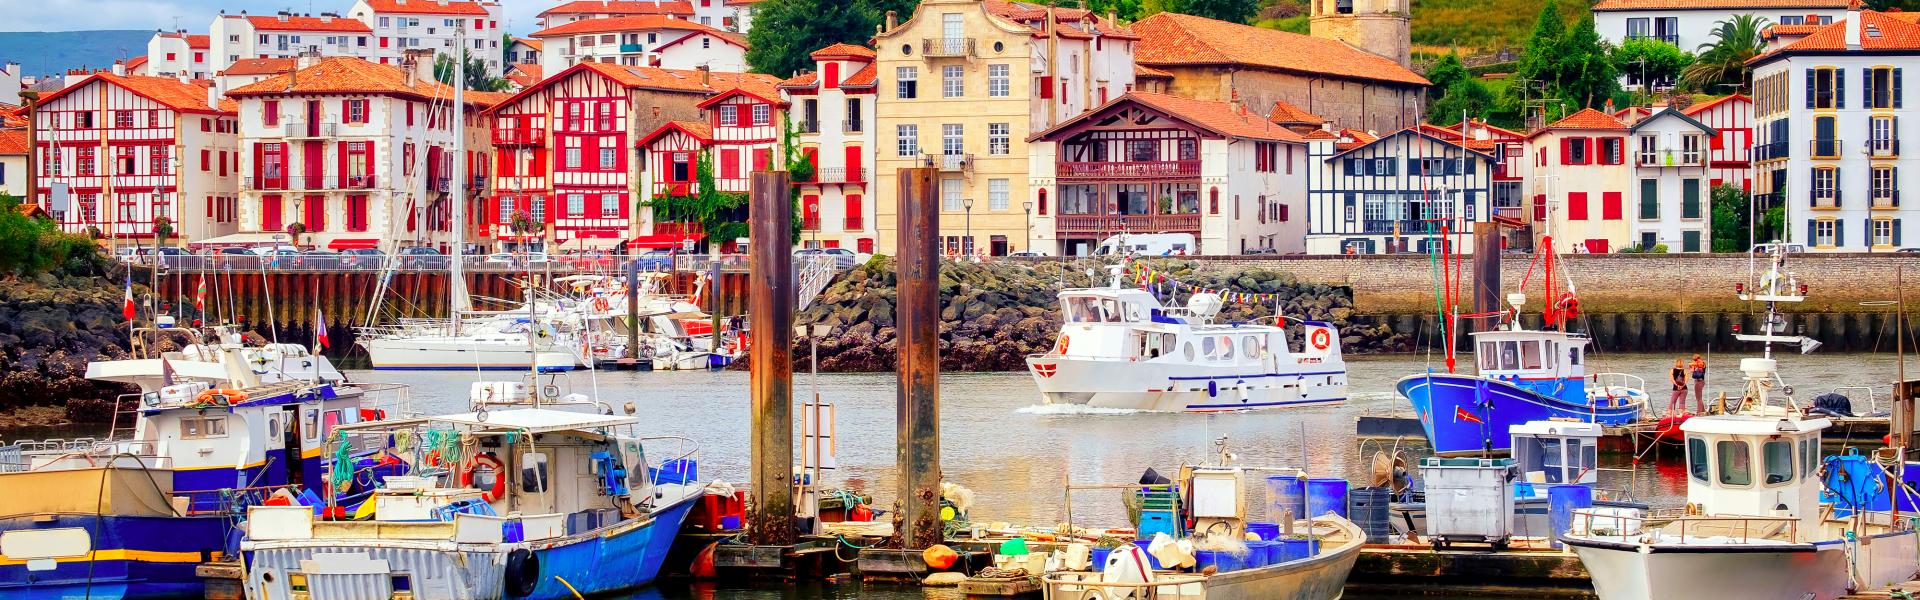 Find the perfect accommodation for your holiday in Saint-Jean-de-Luz - Casamundo